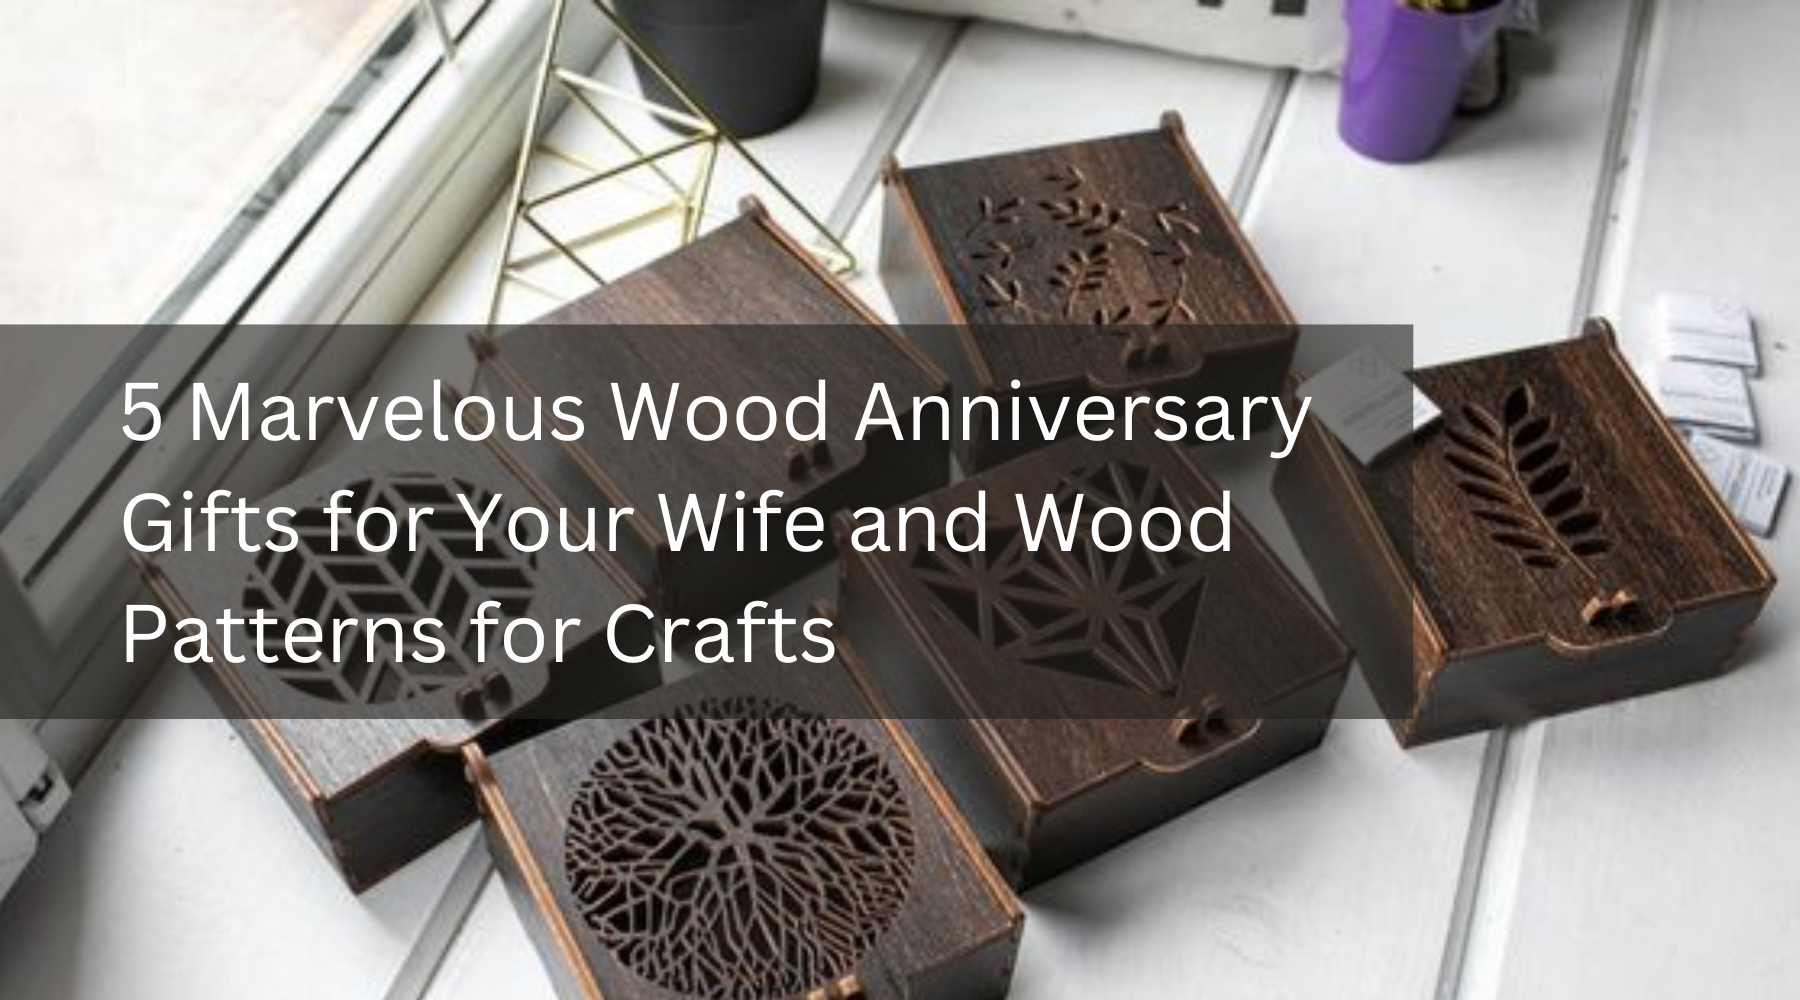 5 Marvelous Wood Anniversary Gifts for Your Wife and Wood Patterns for Crafts